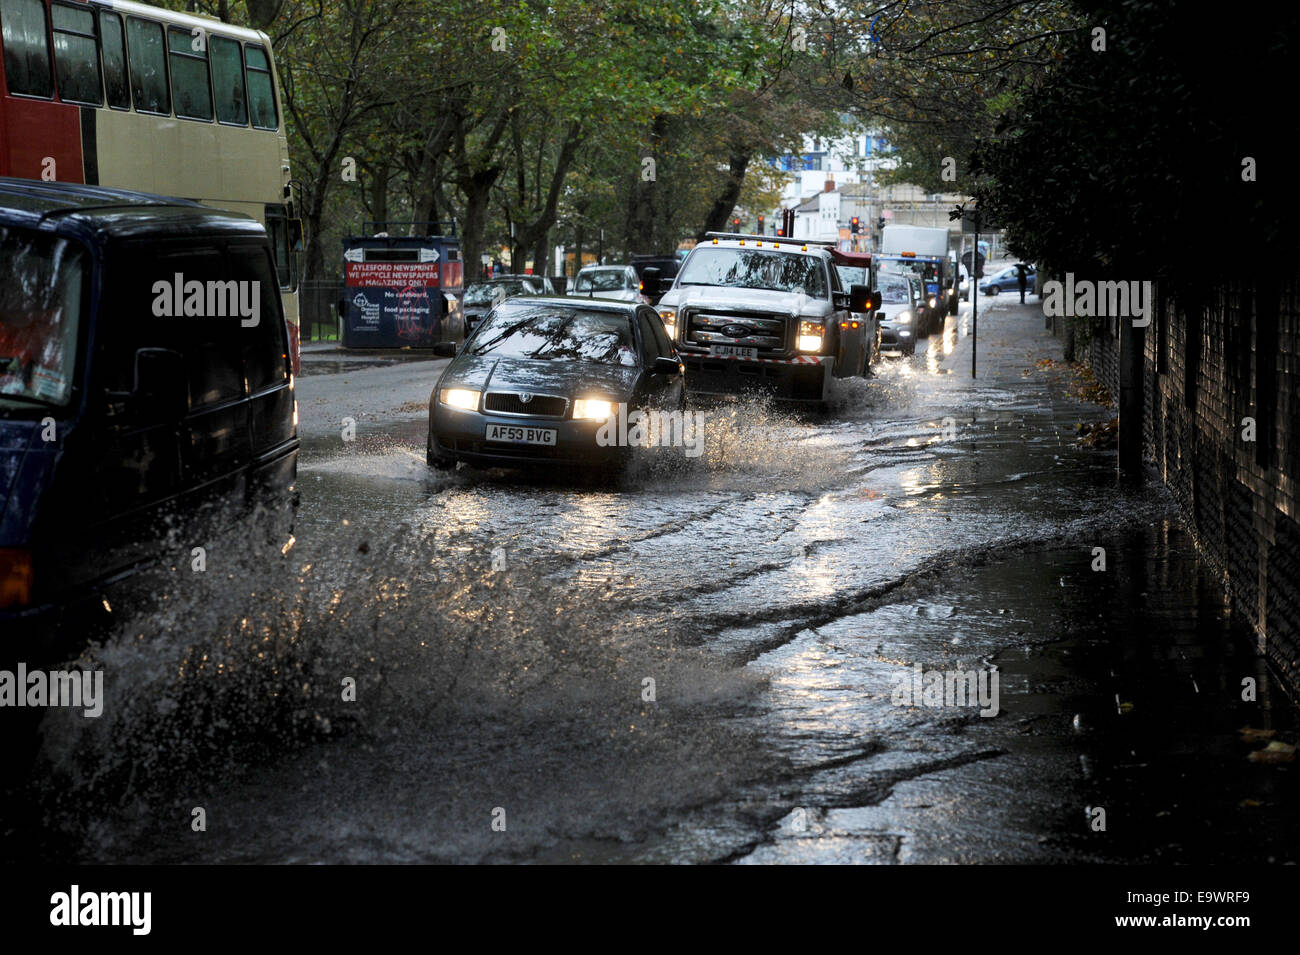 Brighton, Sussex, UK. 3rd November, 2014. UK weather. Traffic drives through flooded roads in the centre of Brighton Stock Photo